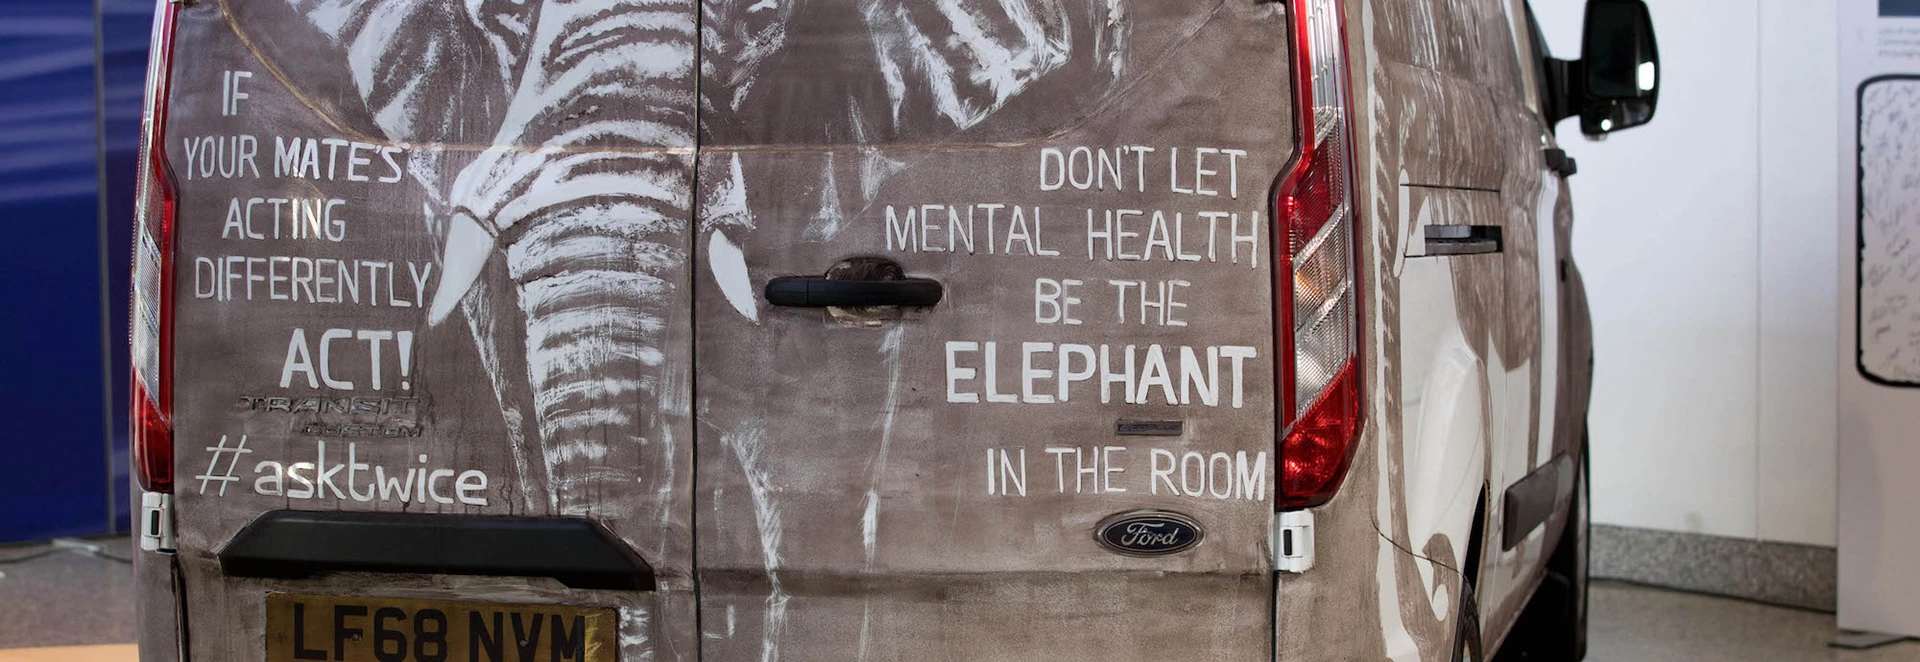 Ford Transit decorated in effort to spread awareness of mental health 